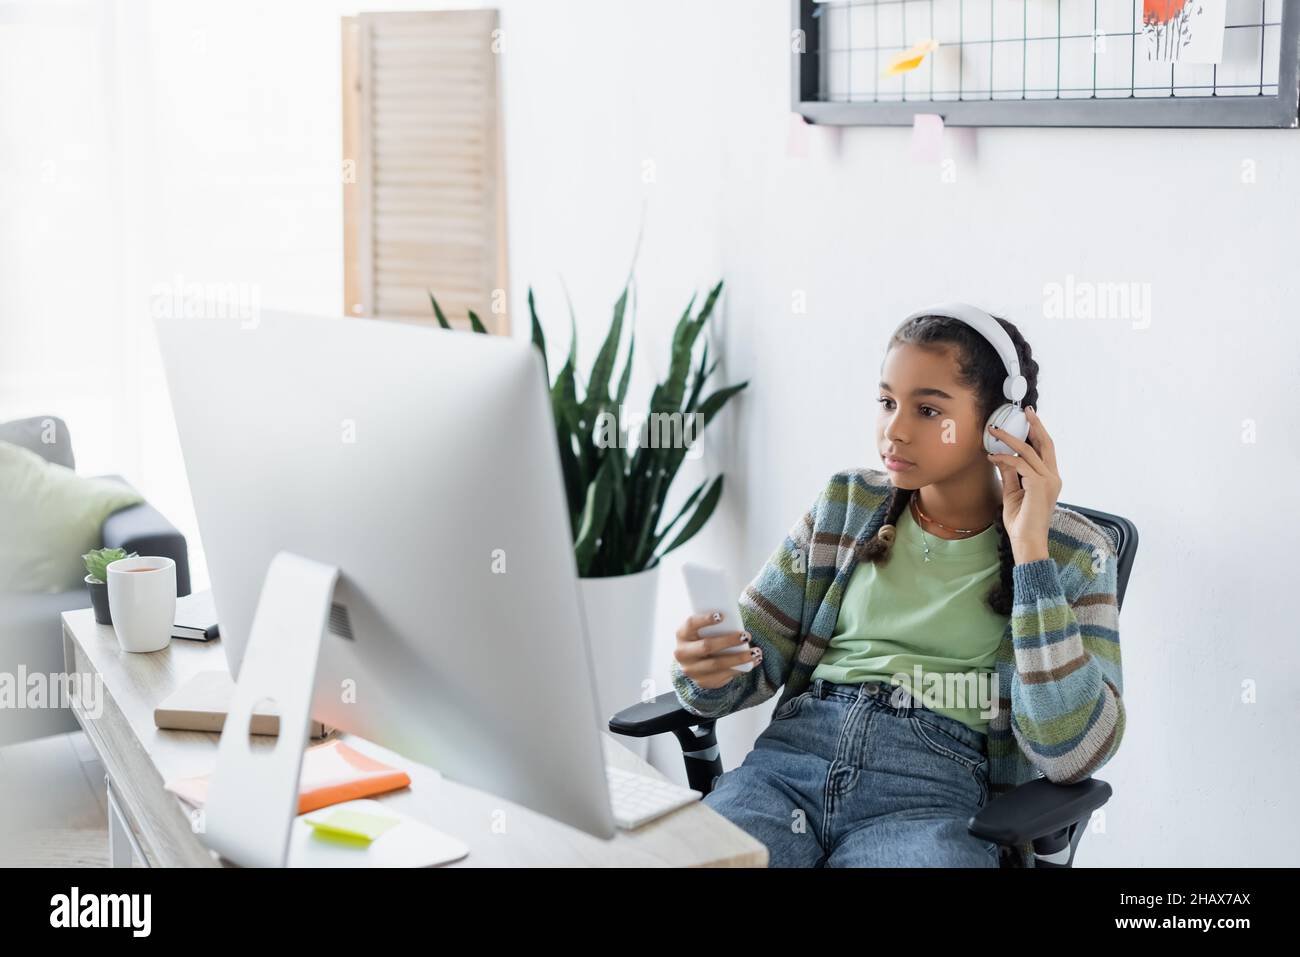 african american teen girl holding cellphone while sitting near computer monitor Stock Photo